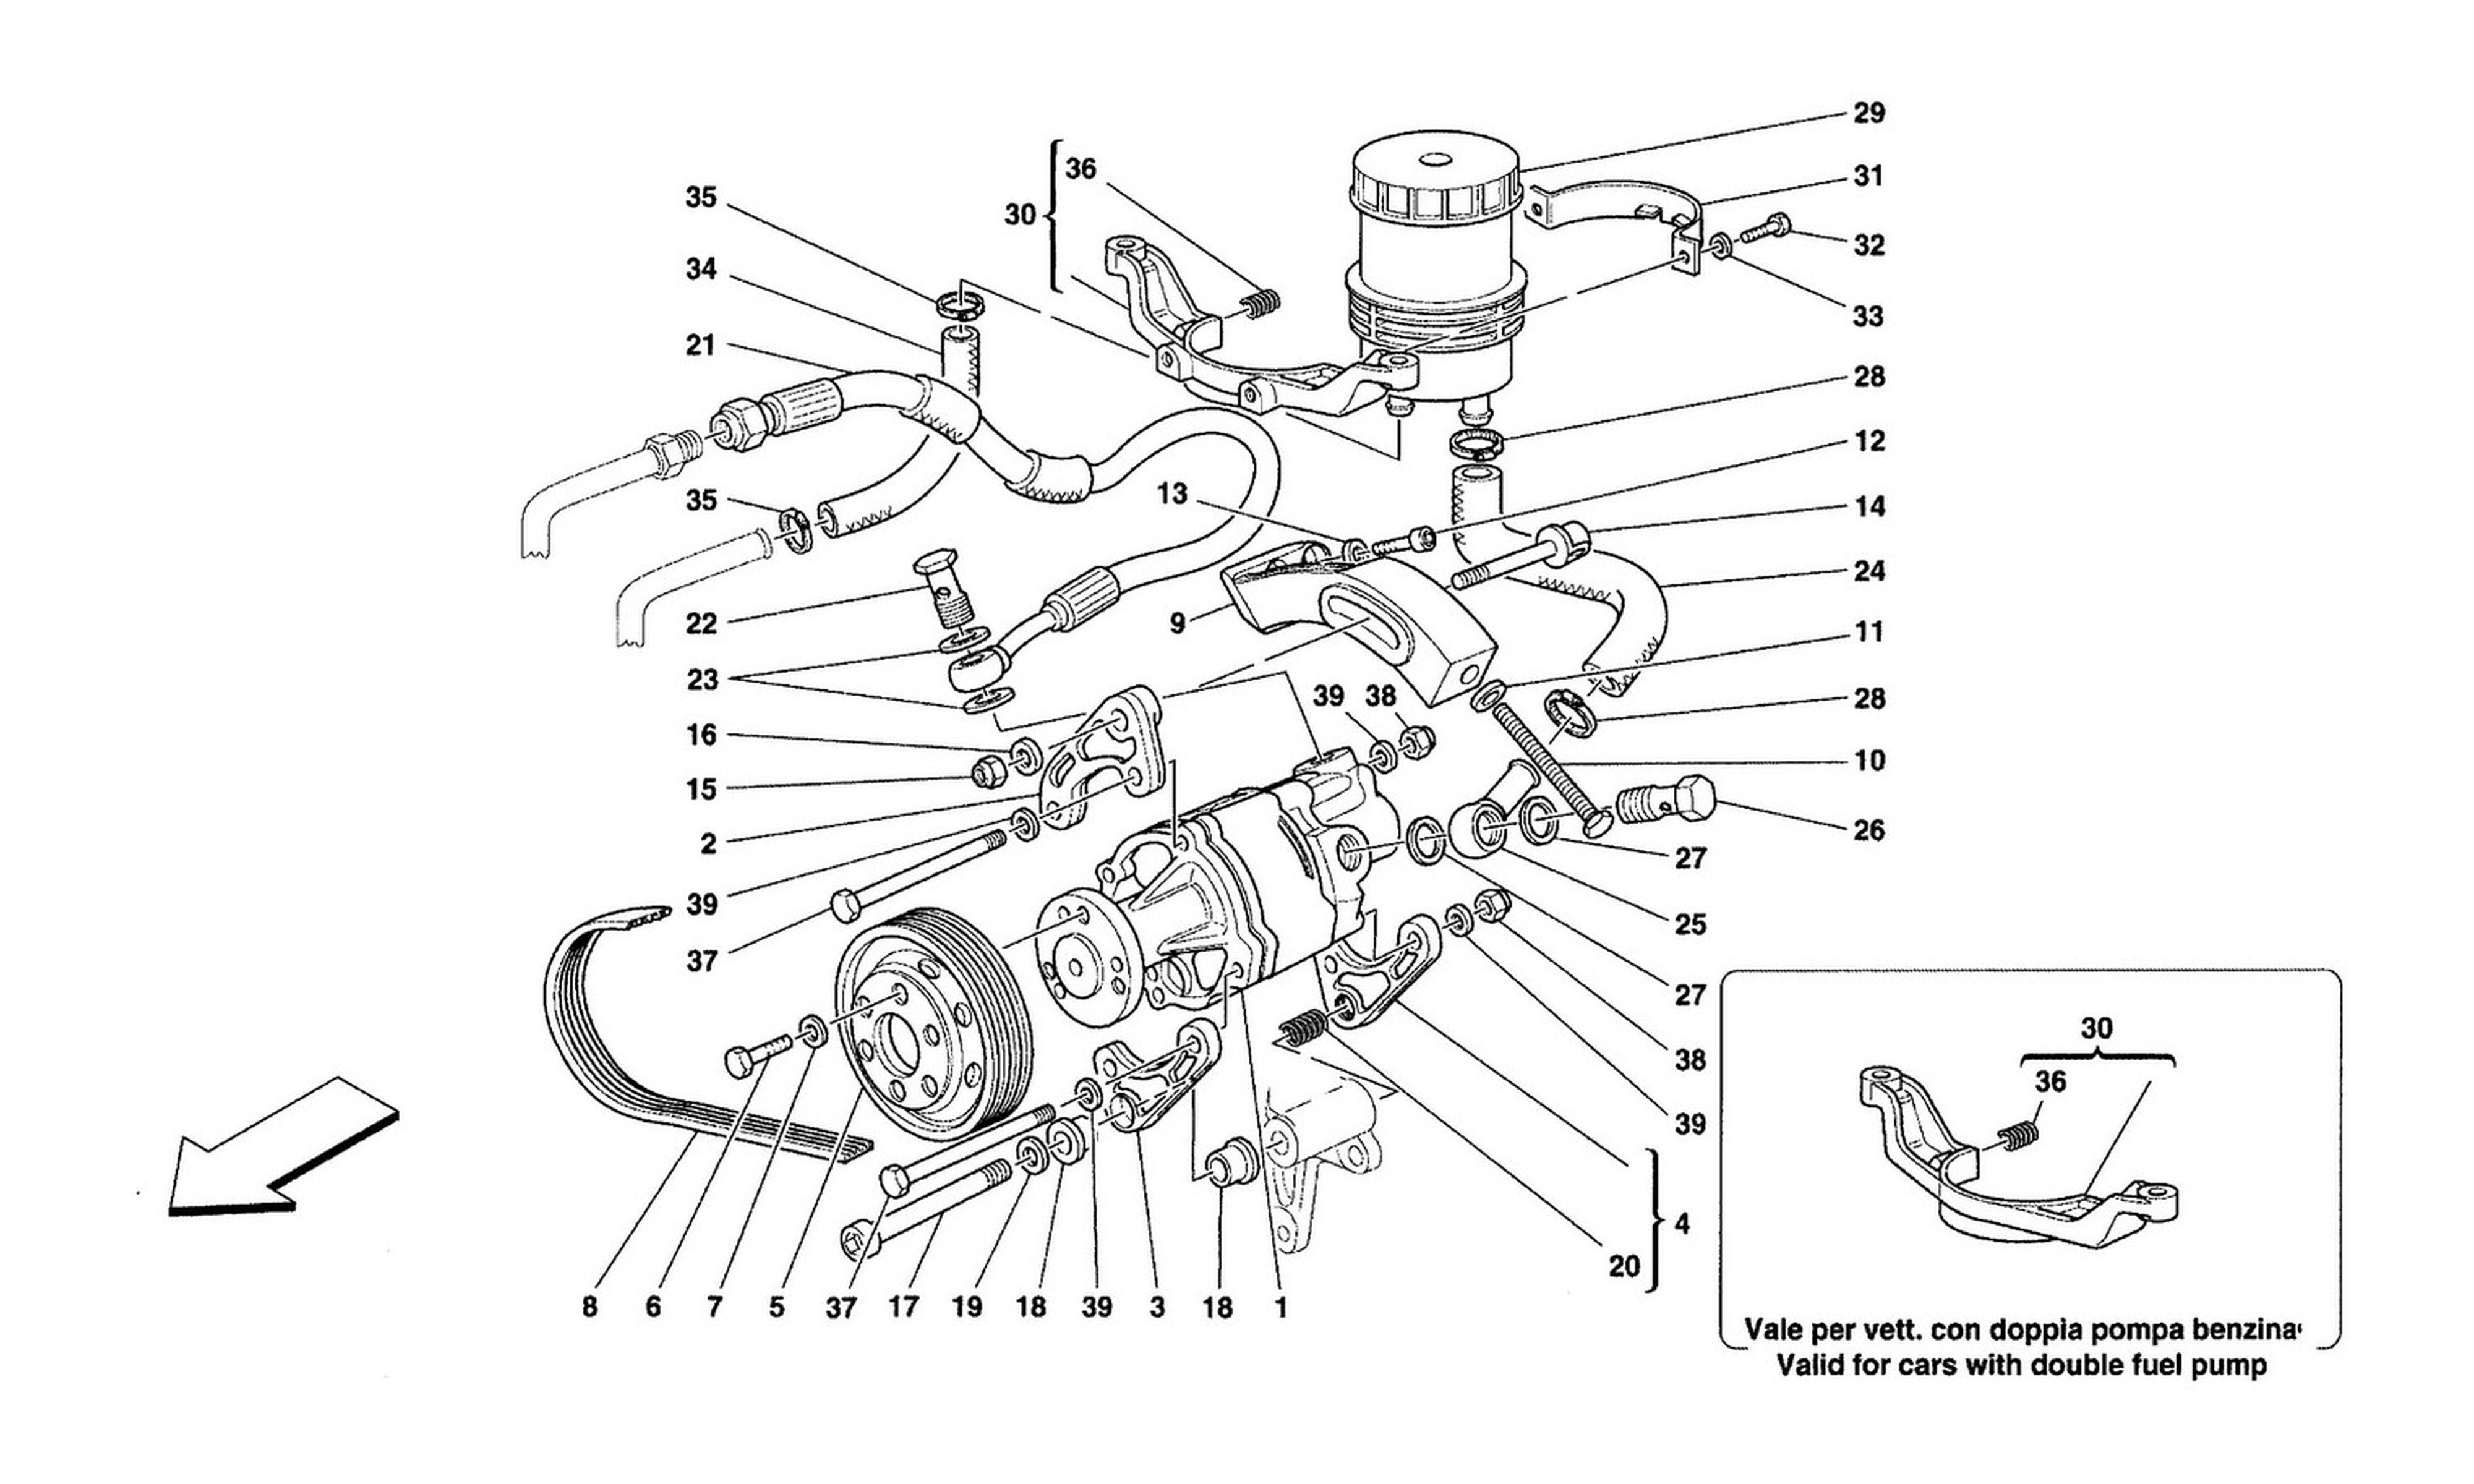 Schematic: Hydraulic Steering Pump -Valid For Steering Box With Power Steering Cars-